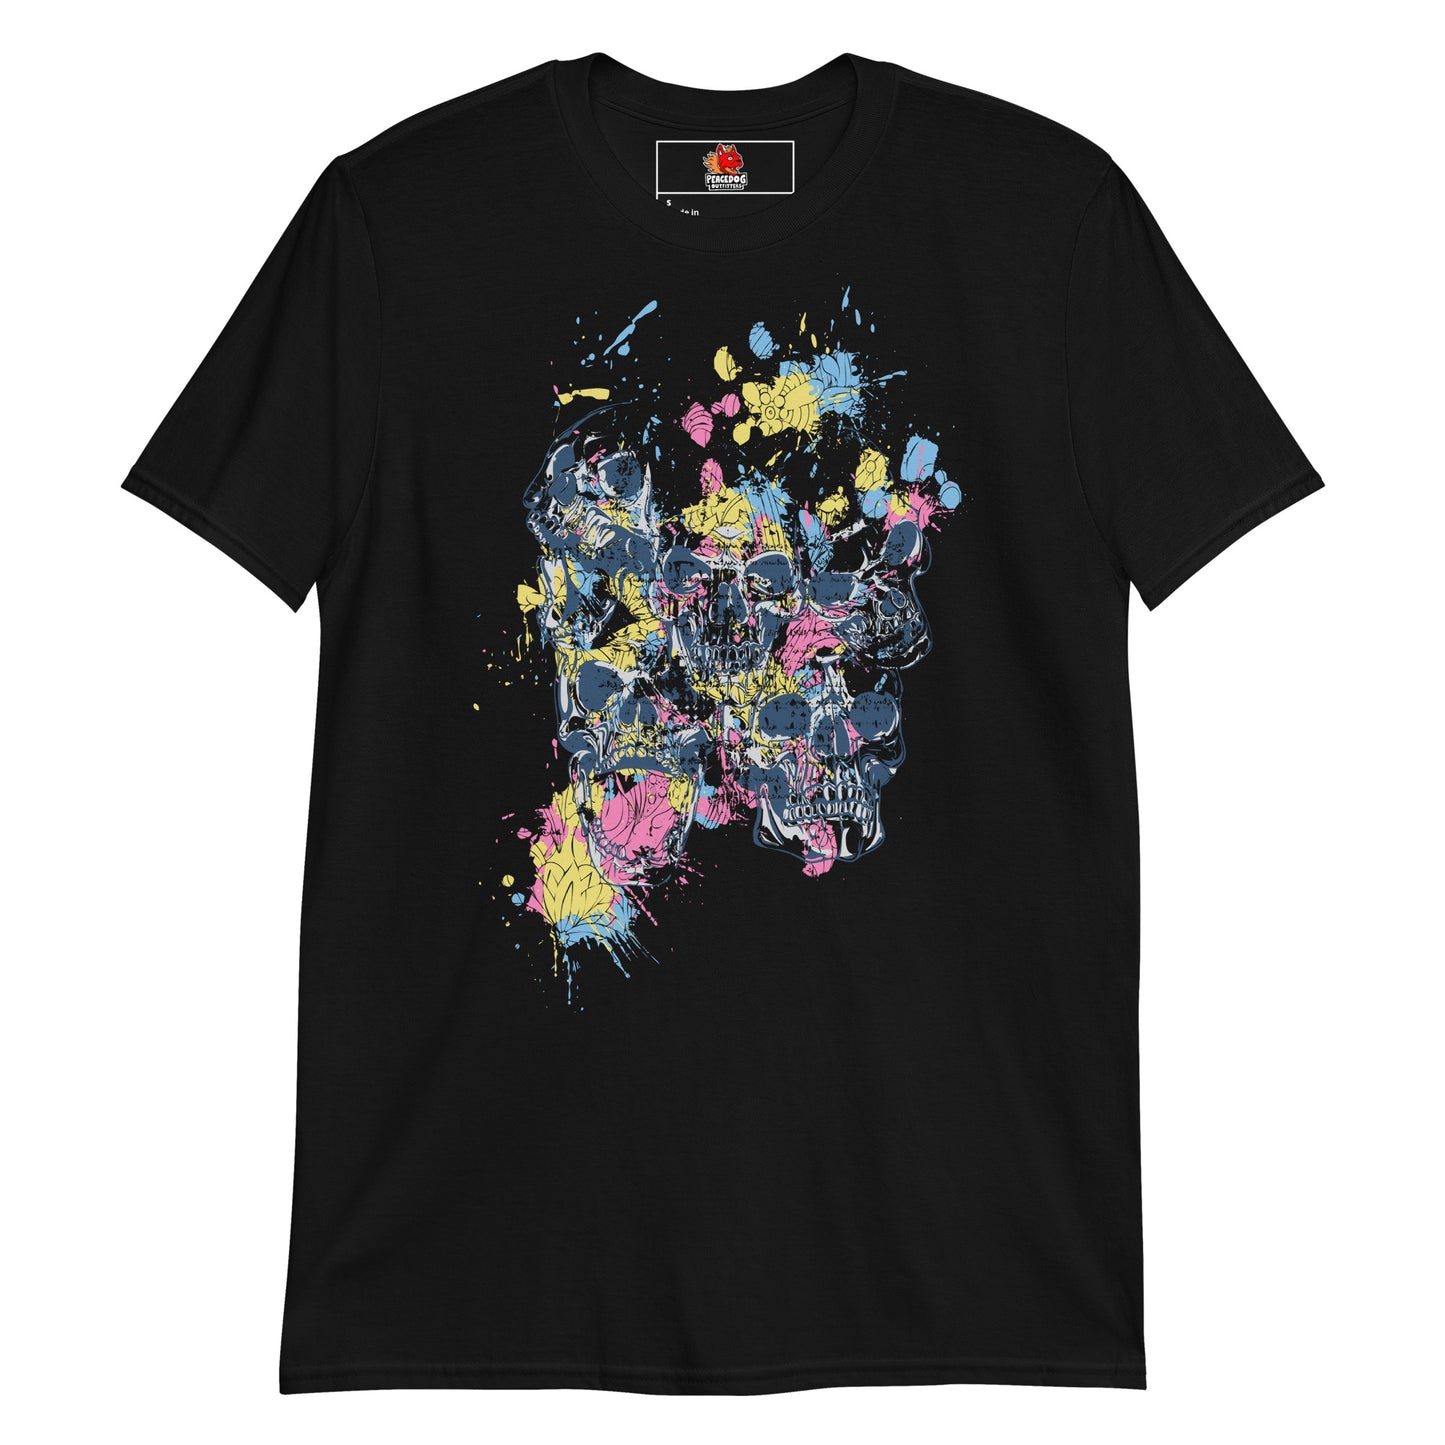 Colorful Skull Collage T-Shirt